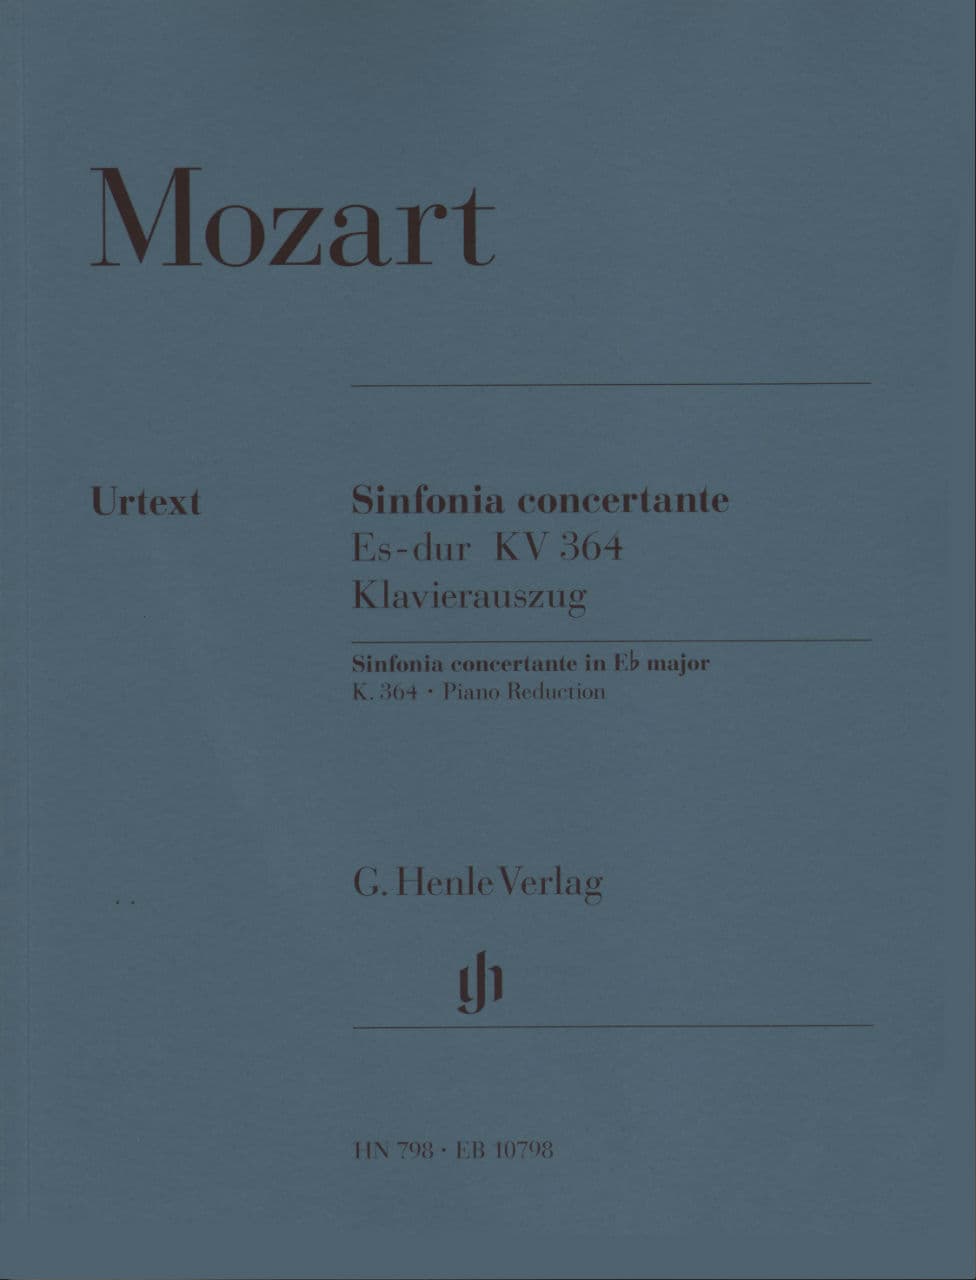 Mozart, WA - Sinfonia Concertante in E-flat Major, K 364 - Violin and Viola with Piano - edited by Wolf-Dieter Seiffert - G Henle Verlag URTEXT